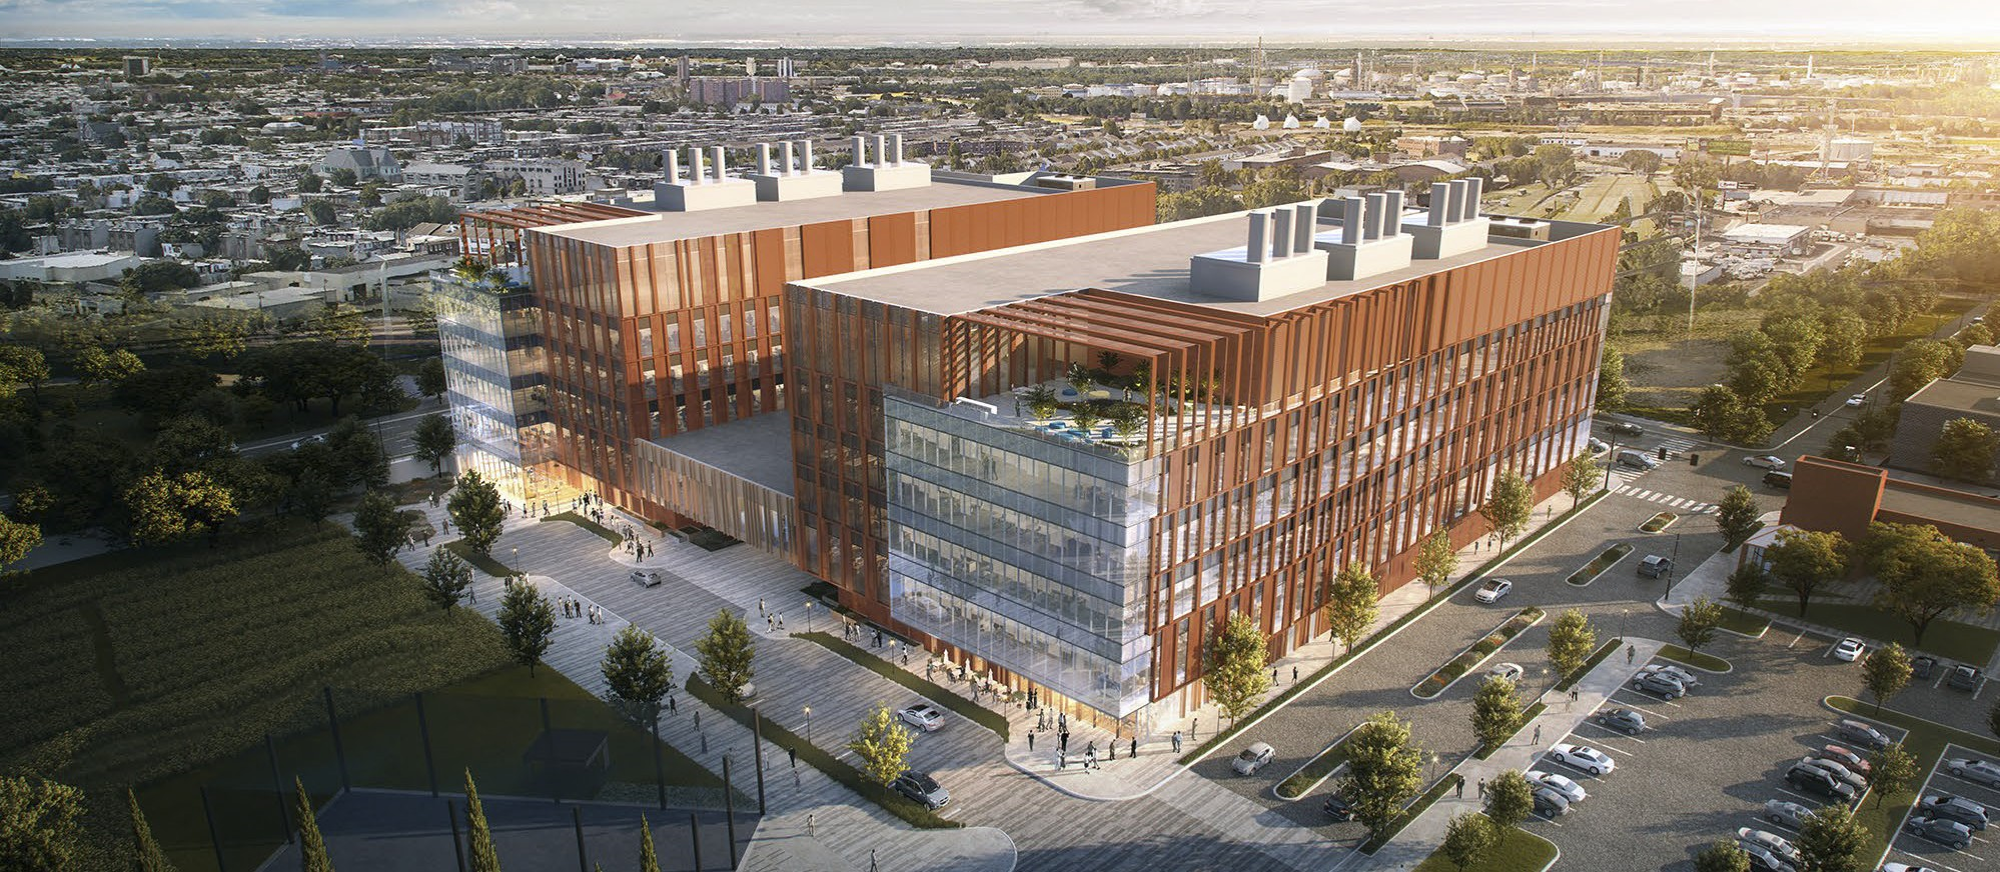 Rendering depicting aerial view of new life sciences building on Pennovation Works campus